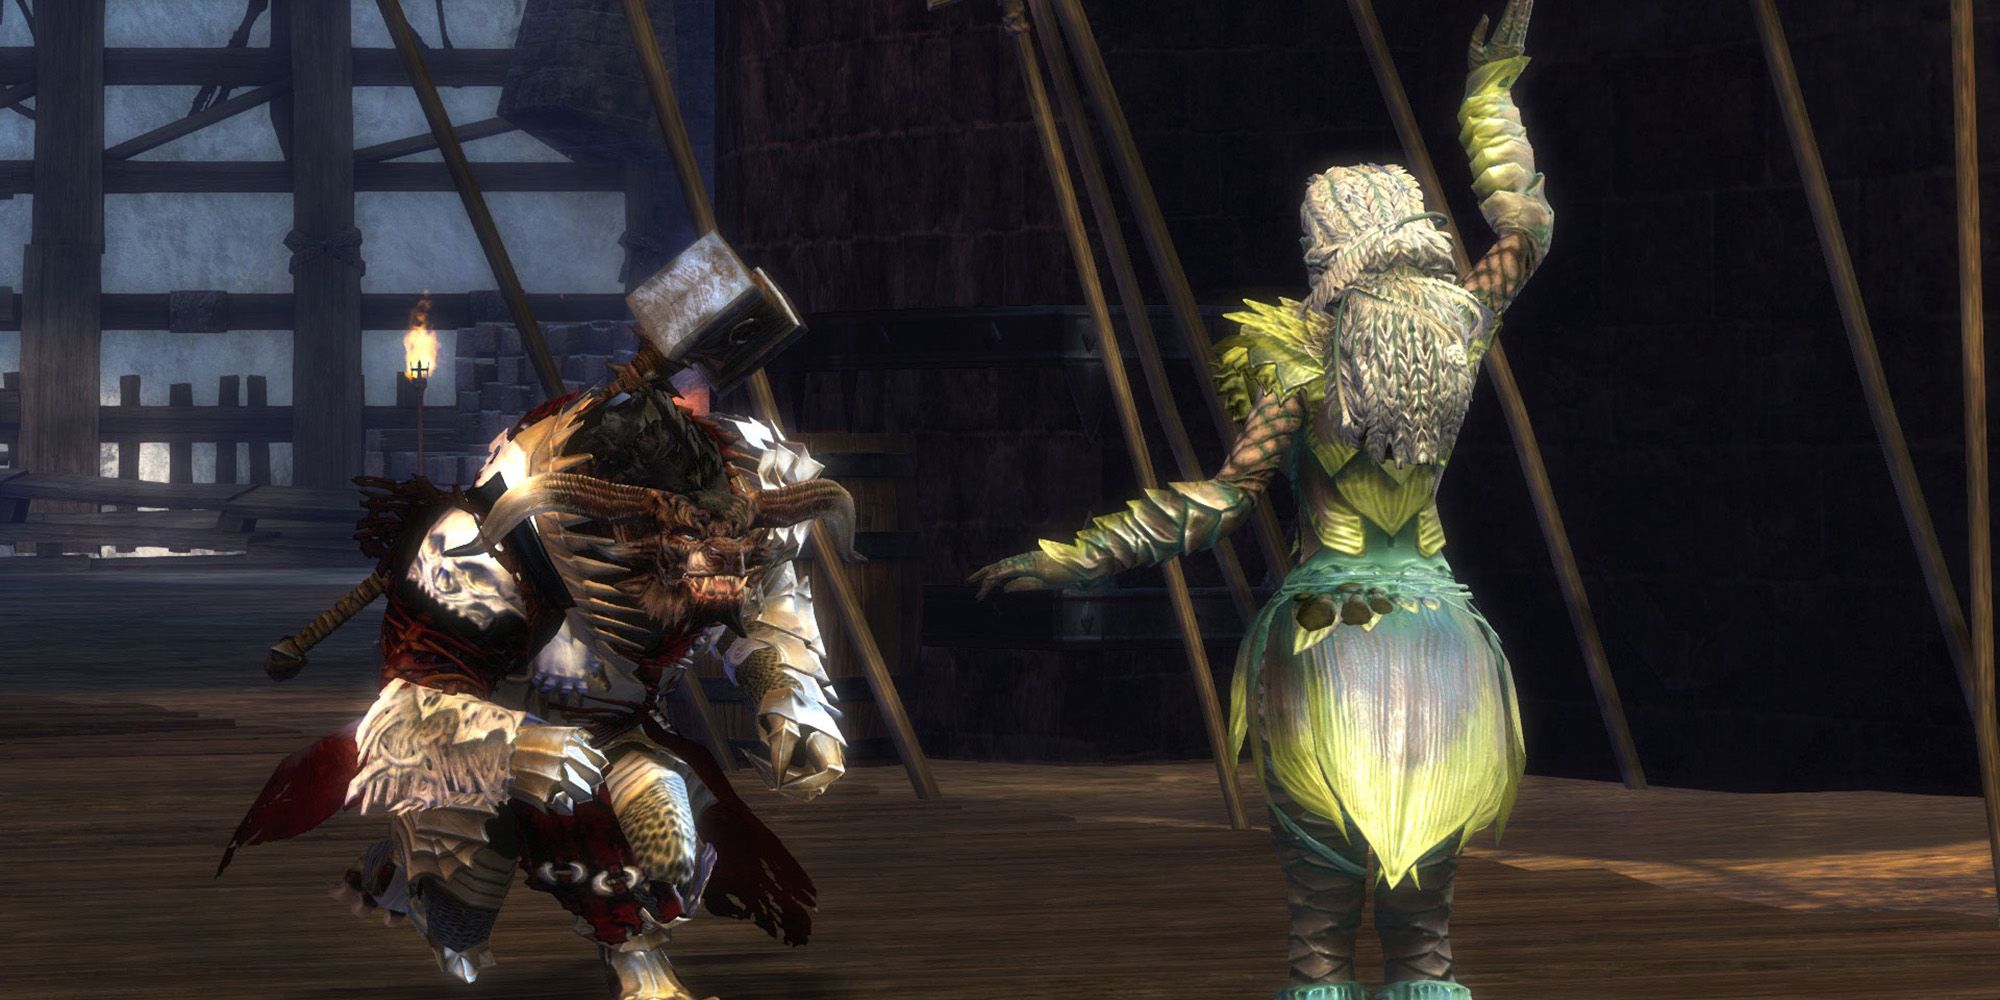 Guild Wars 2 Waving emote from two characters